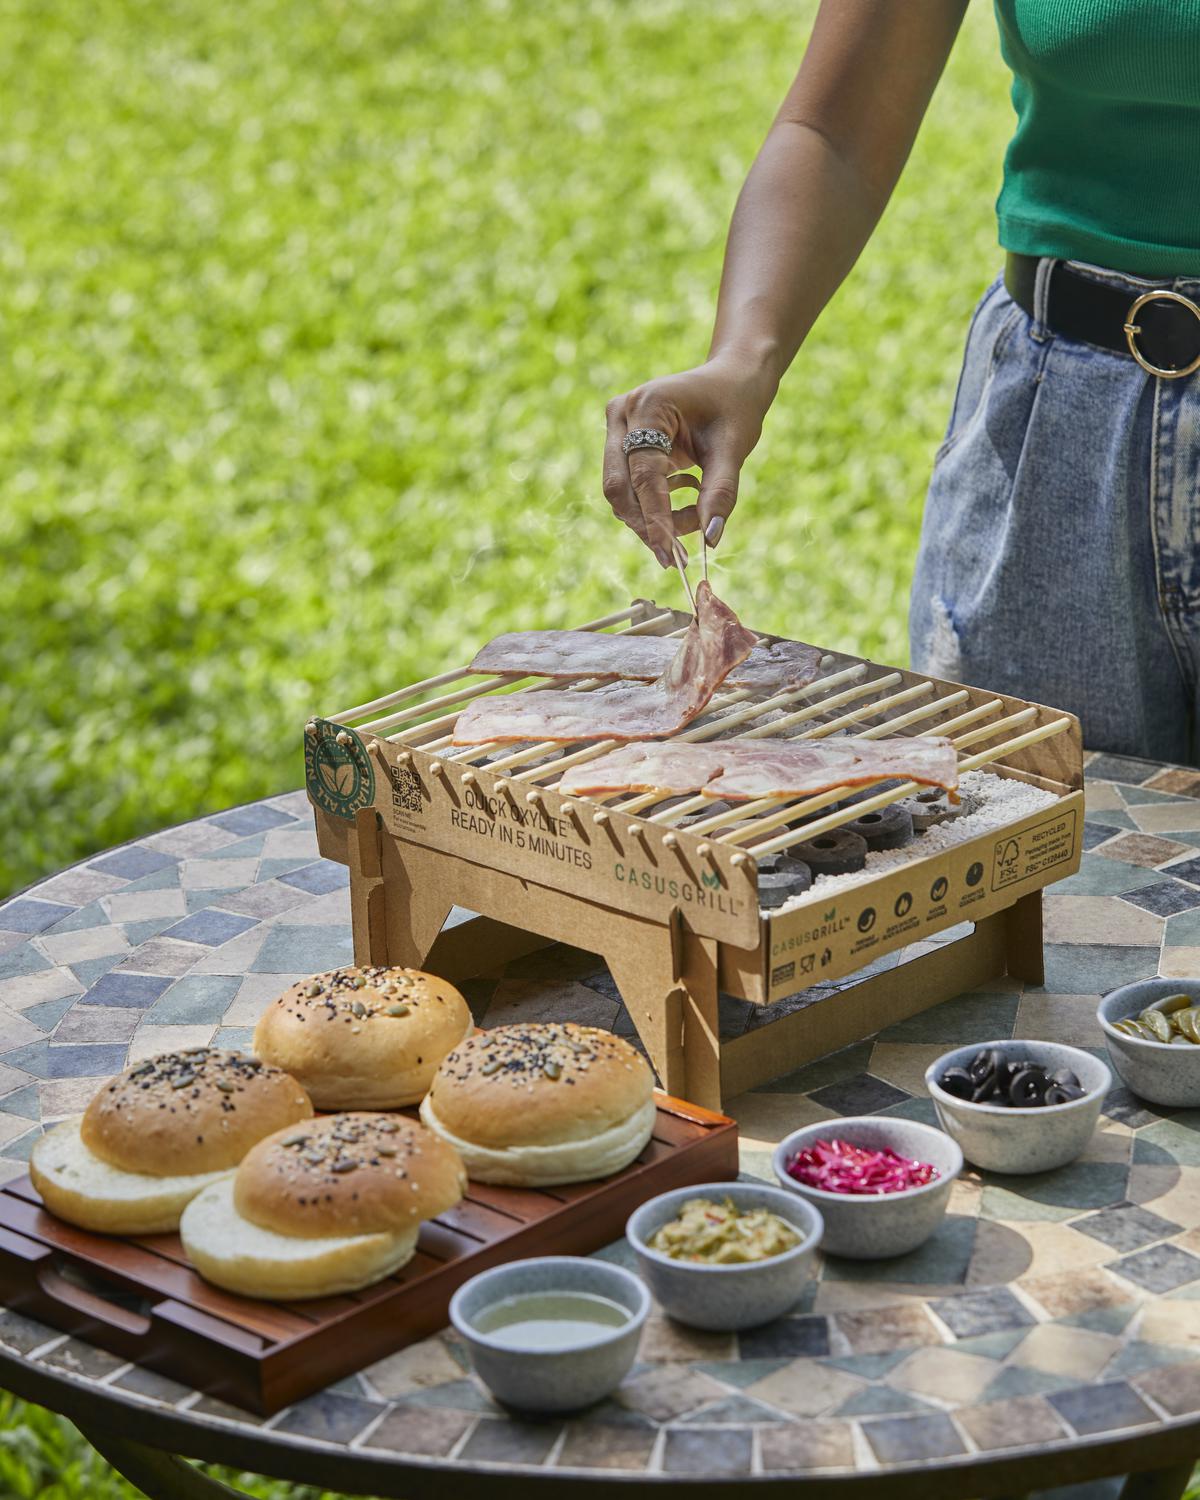 Now, travel with a burger grill box on picnics